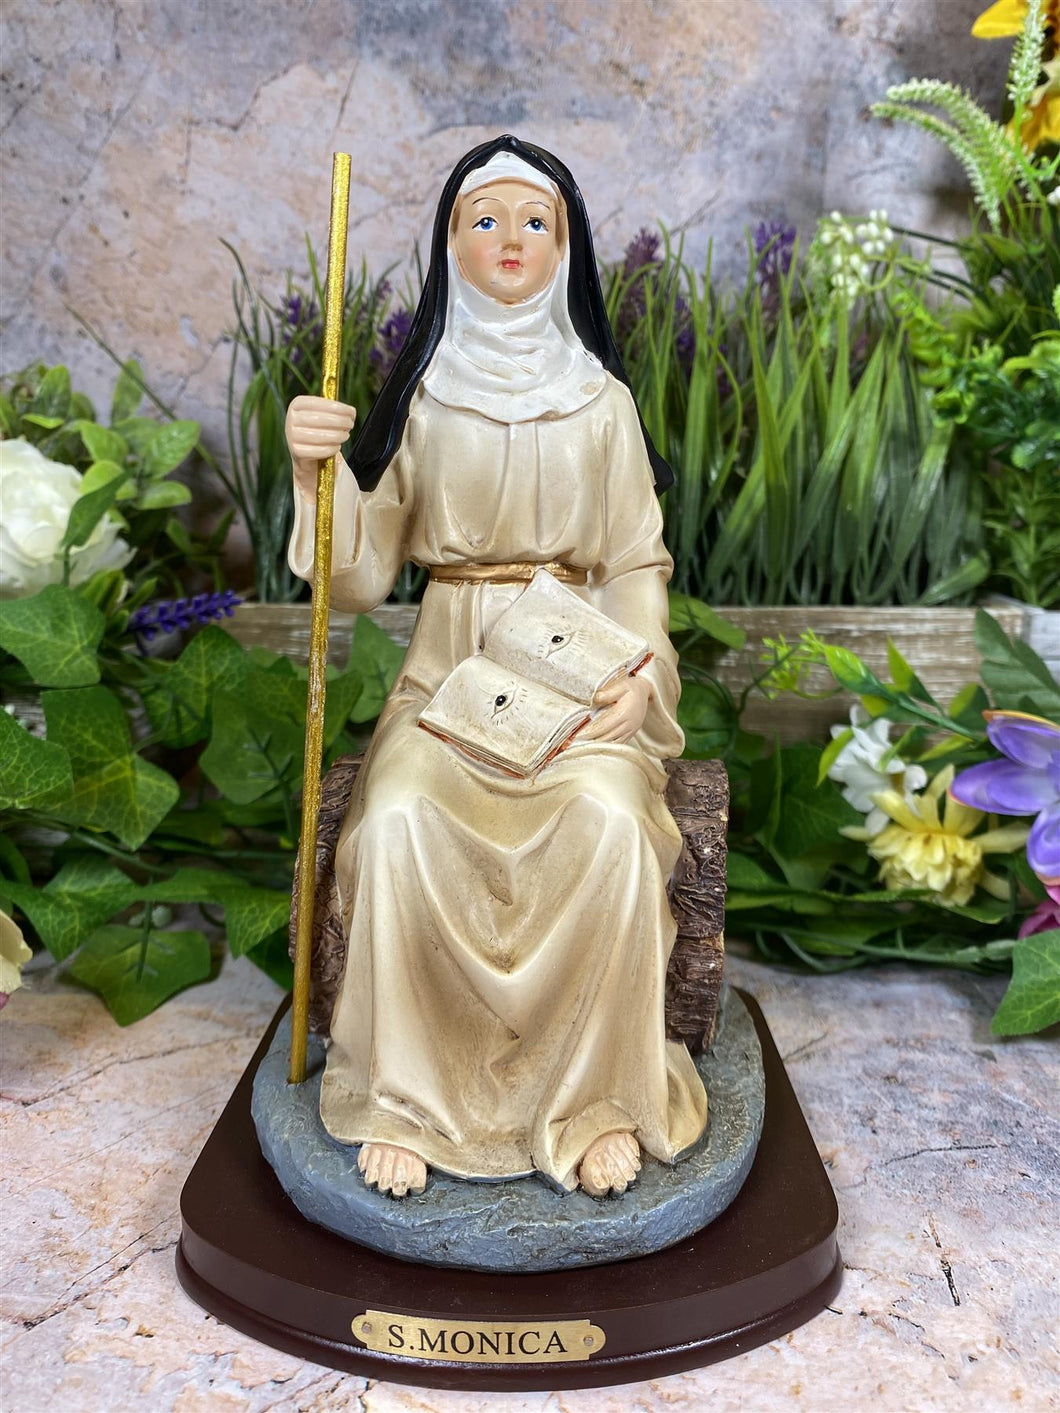 Saint Monica Resin Statue, Patroness of Mothers and Wives, Hand-Painted Figurine, Christian Home Decor, Inspirational Religious Art